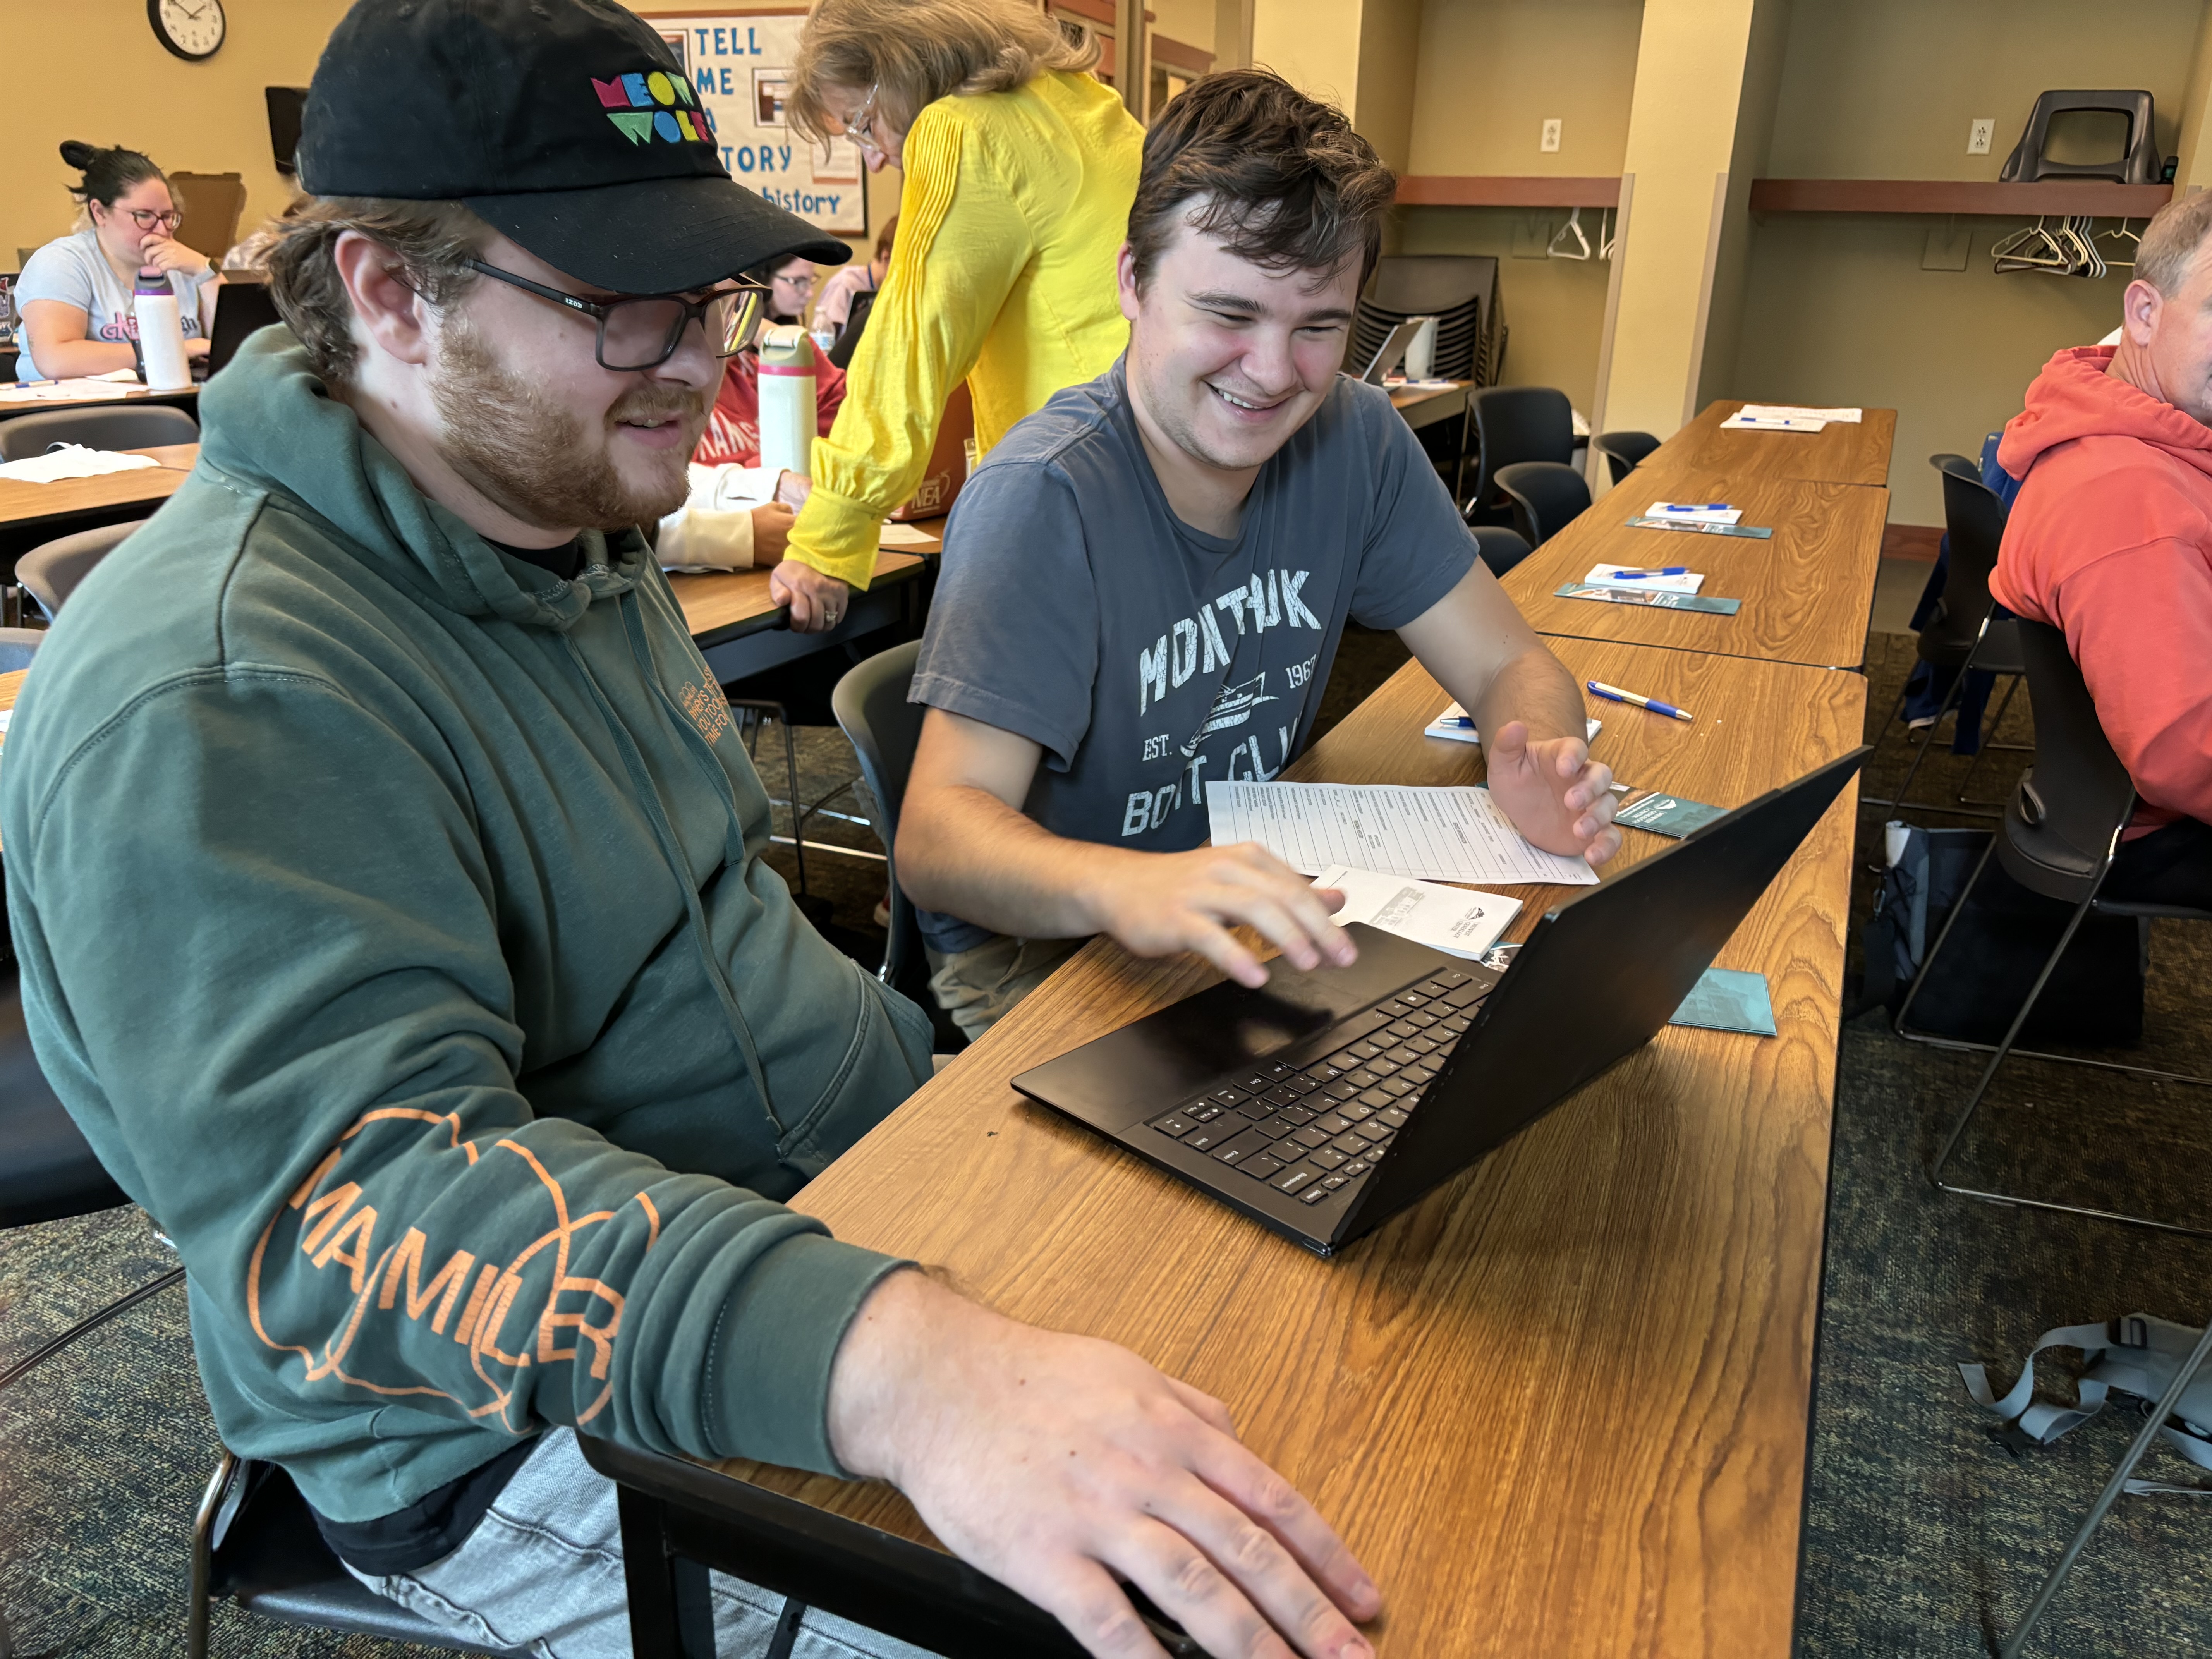 Veteran Voices from the Heartland MA student Joey Lake and undergraduate student Truman Harrow of UCM attend the session at the Midwest Genealogy Center in Independence, Missouri.